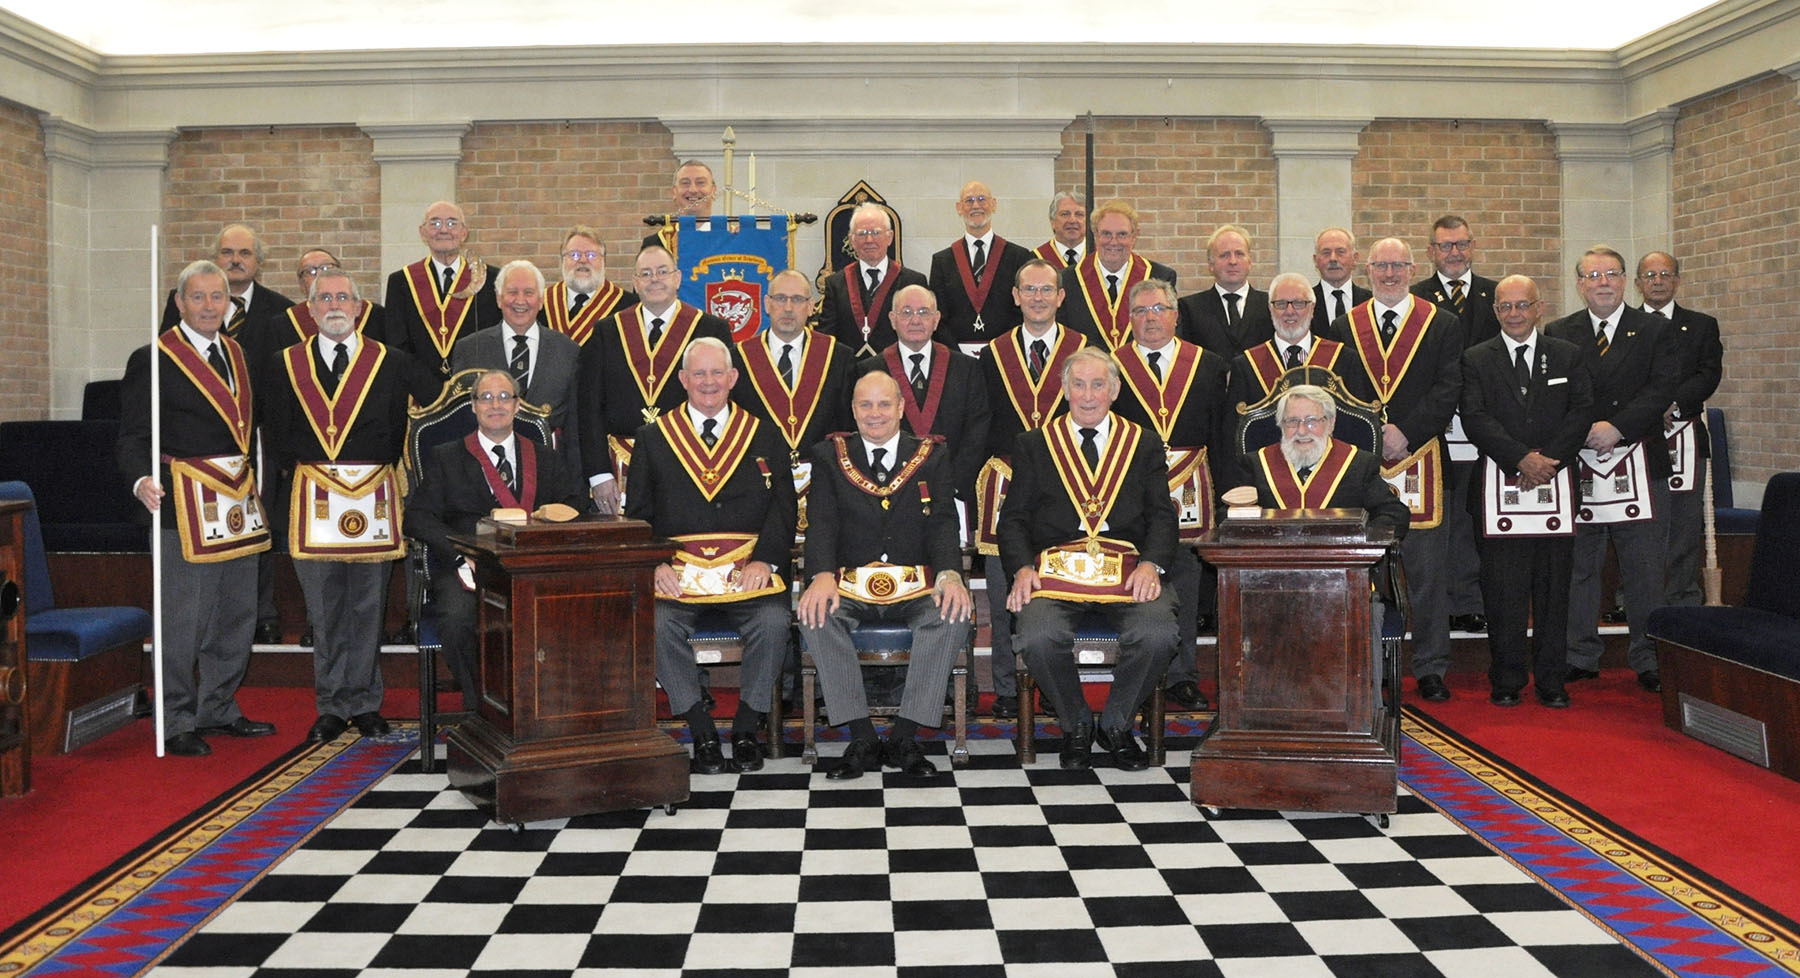 Official Visit by the Deputy Provincial Grand Master to The Court of King Alfred the Great